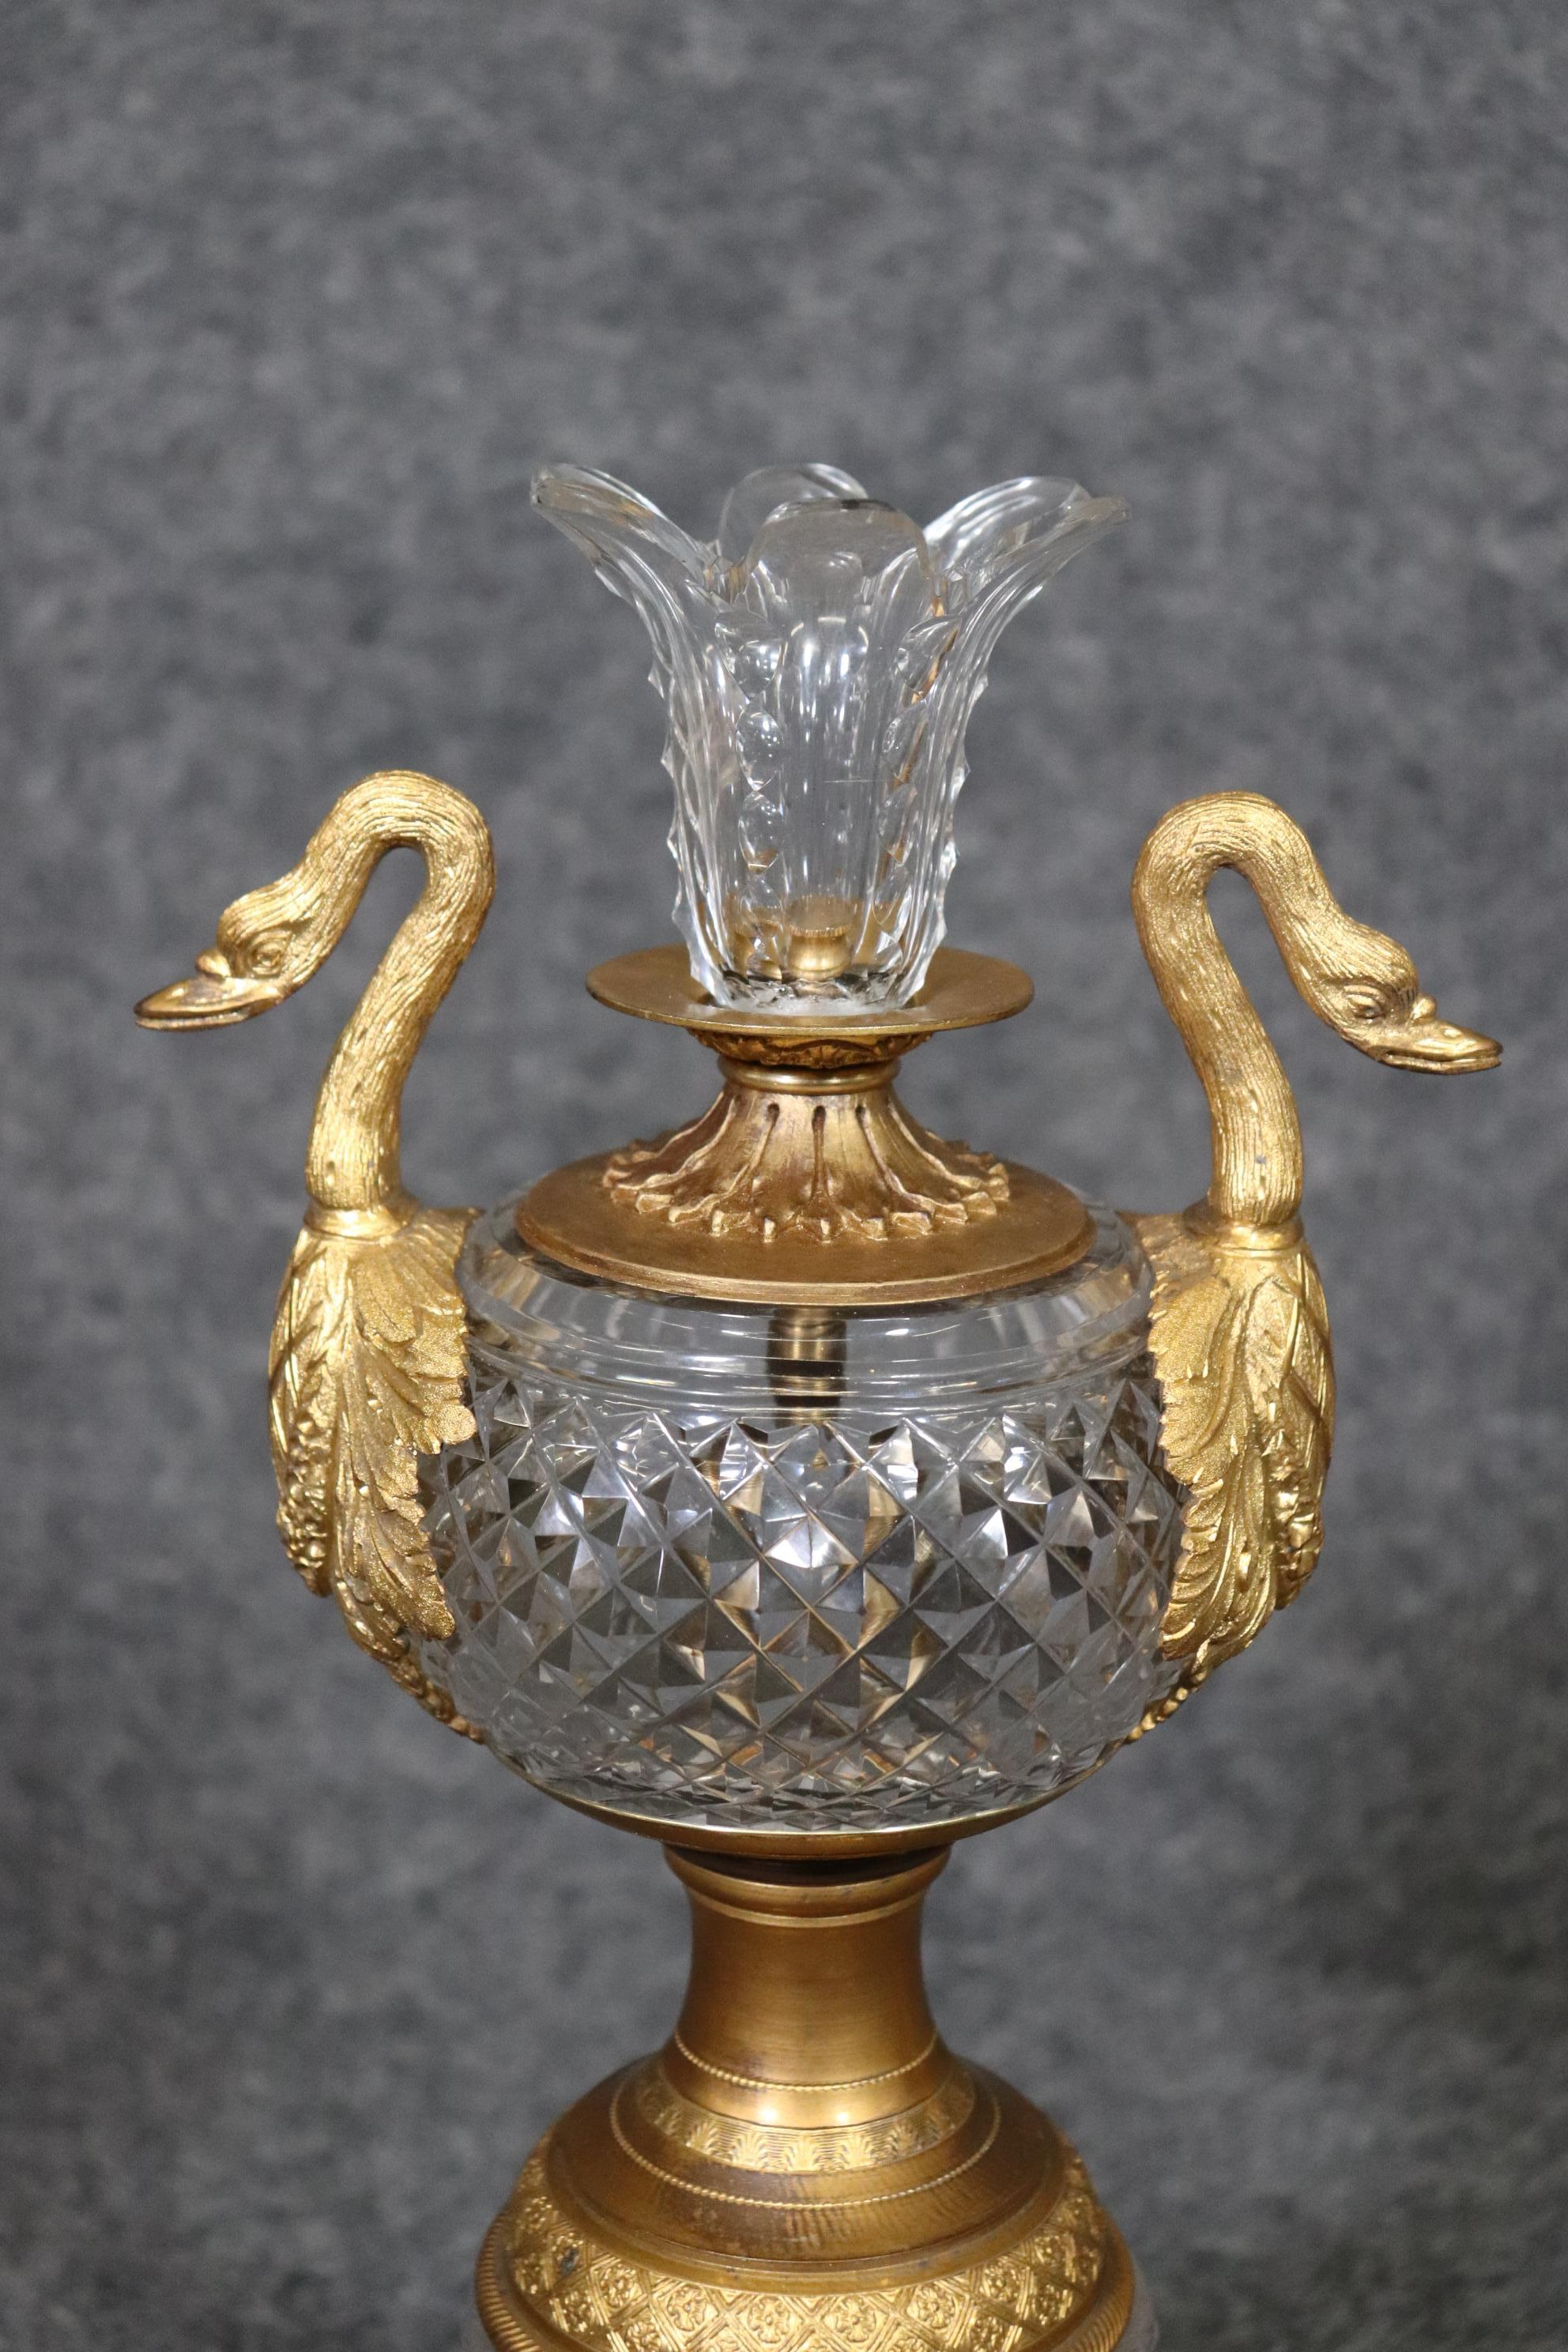 Exceptional Pair of Baccarat Quality Crystal Dore' Bronze Cassolettes with Swans 6